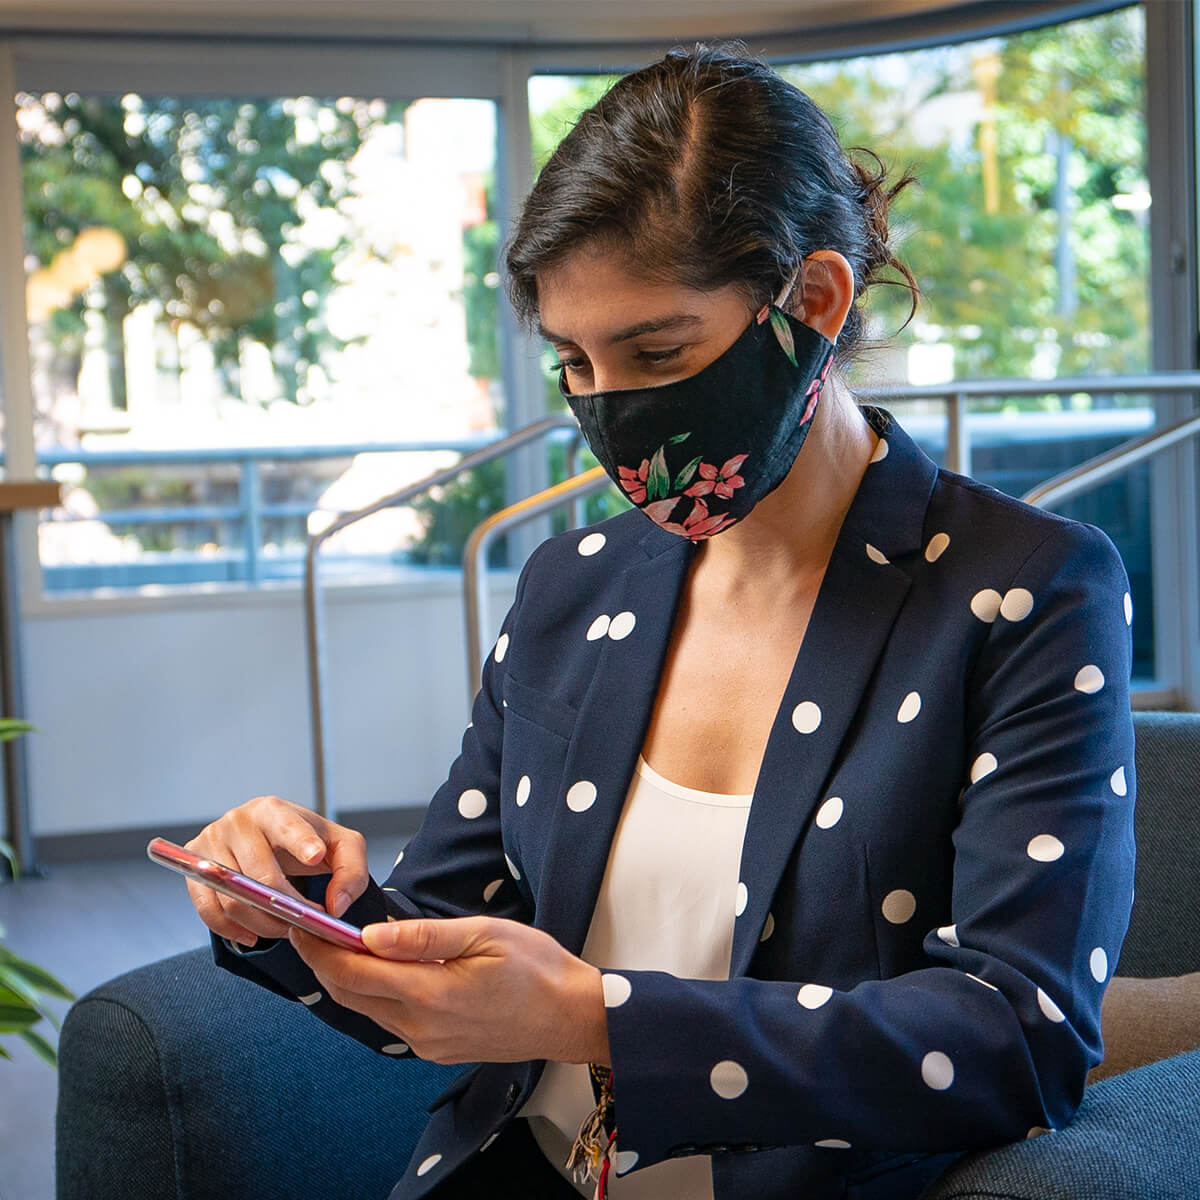 A formally dressed woman wearing a face mask checking her phone.